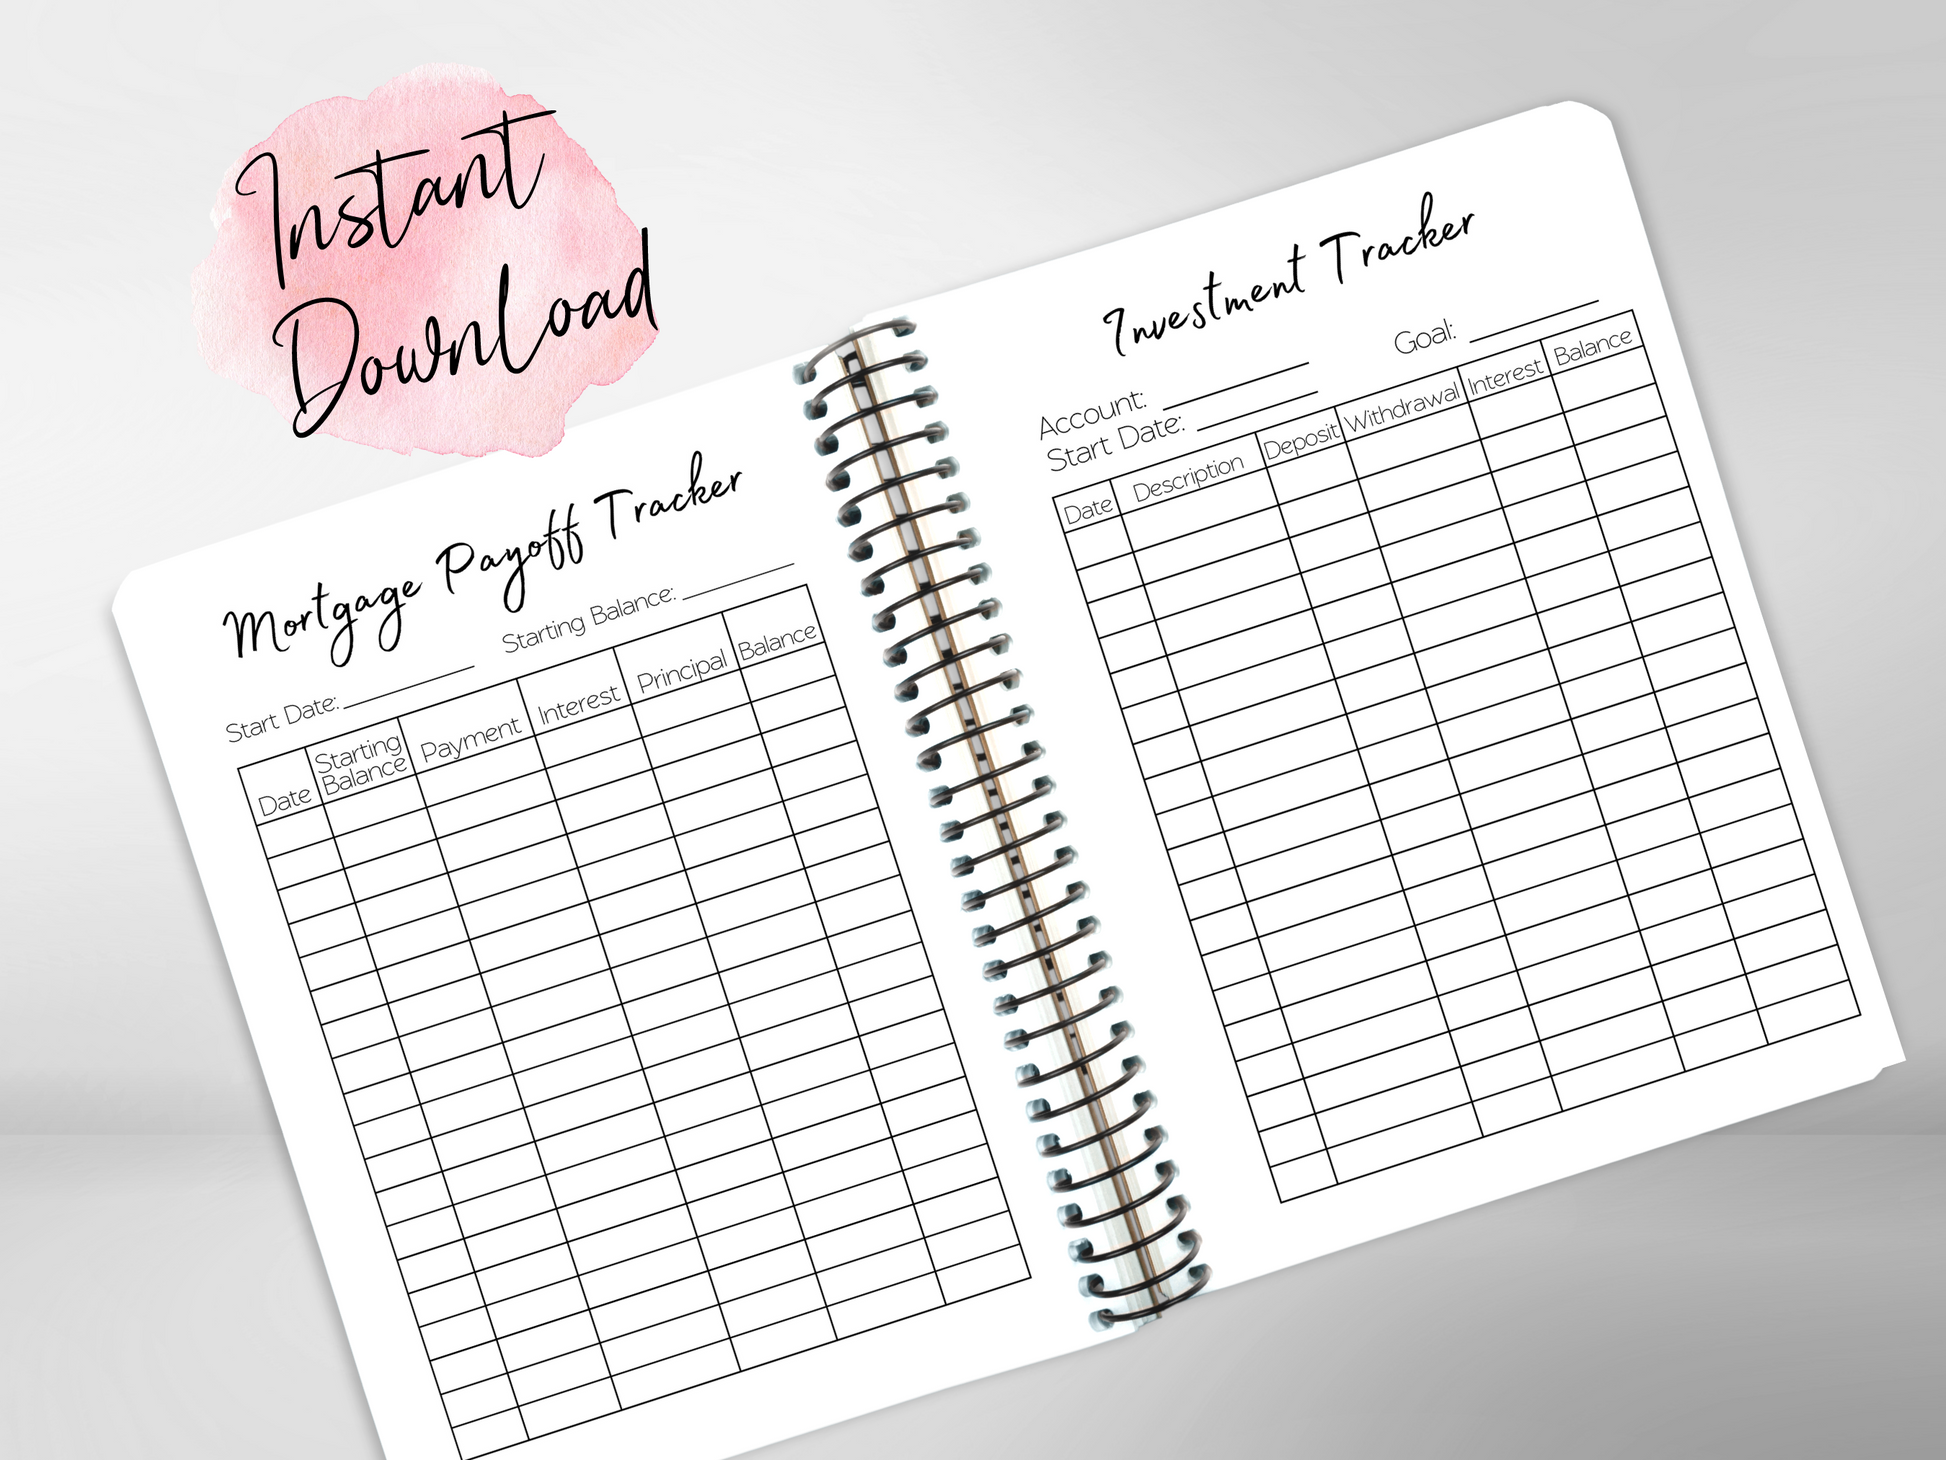 Budget Planner- Printable Insert (A5) & Digital Download – Free Download |  One Page Layout